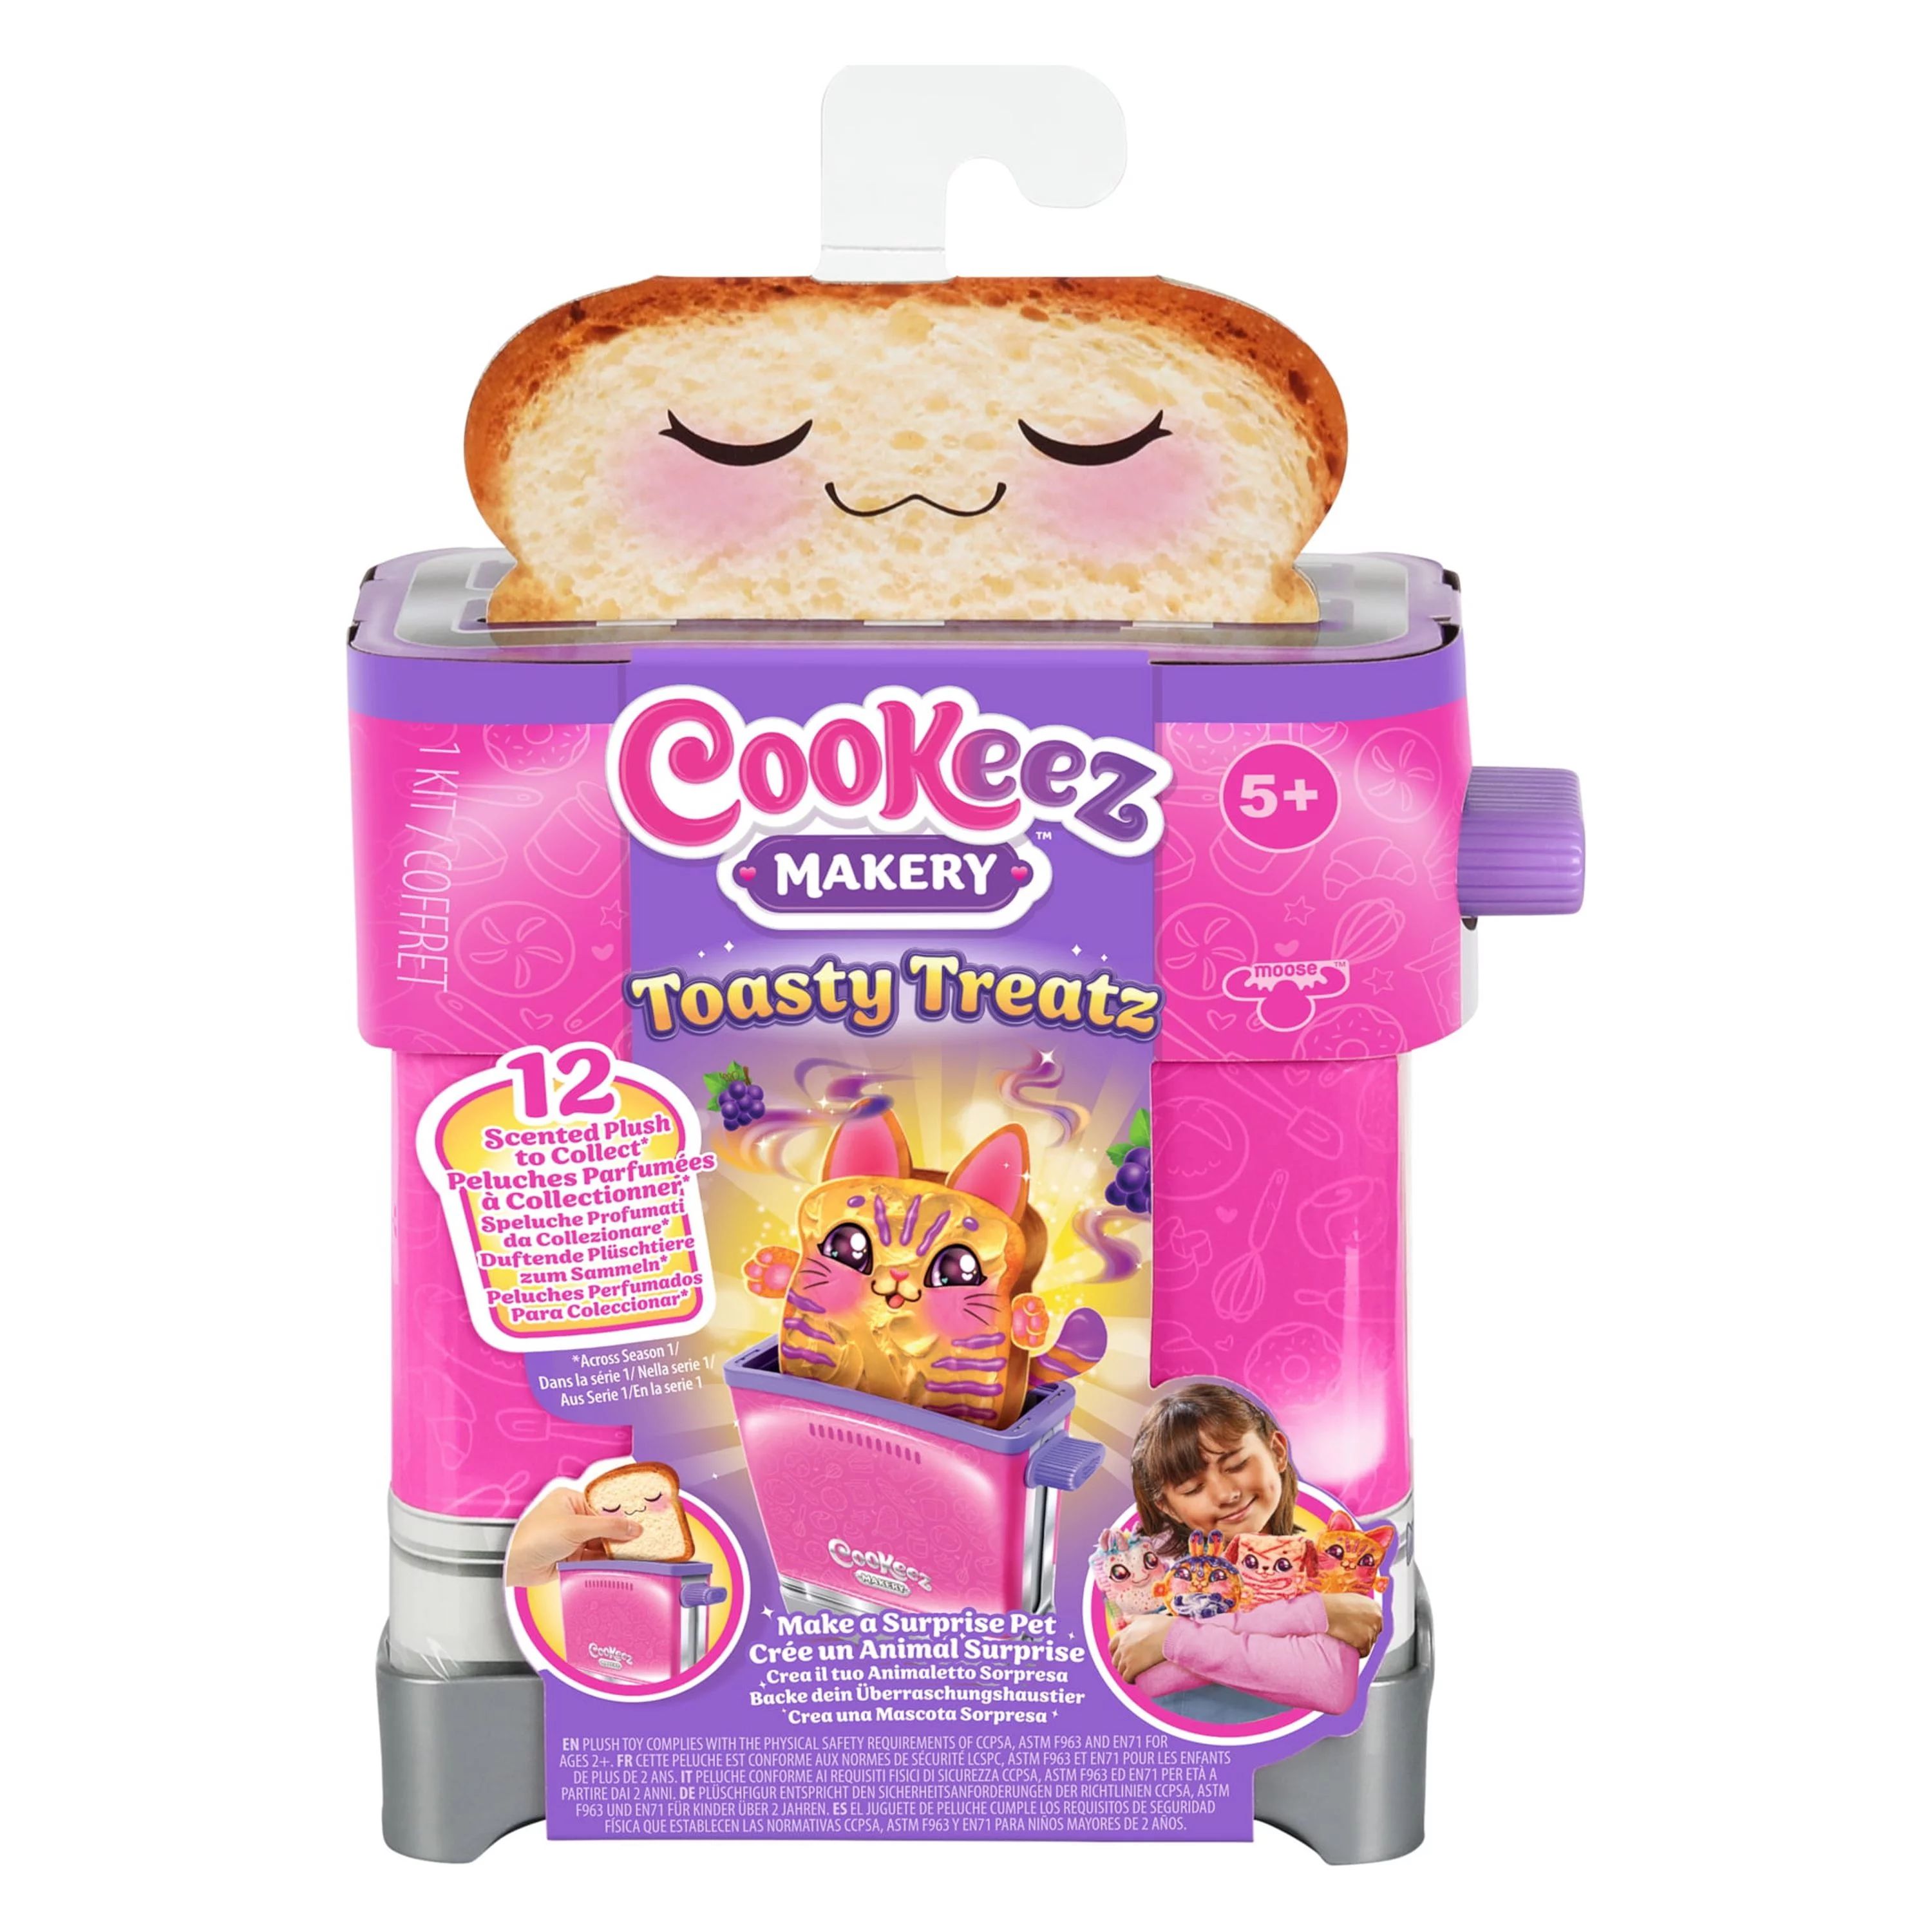 Cookeez Makery Toasty Treatz Toaster with Scented Plush, Styles Vary, Ages 5+ | Walmart (US)